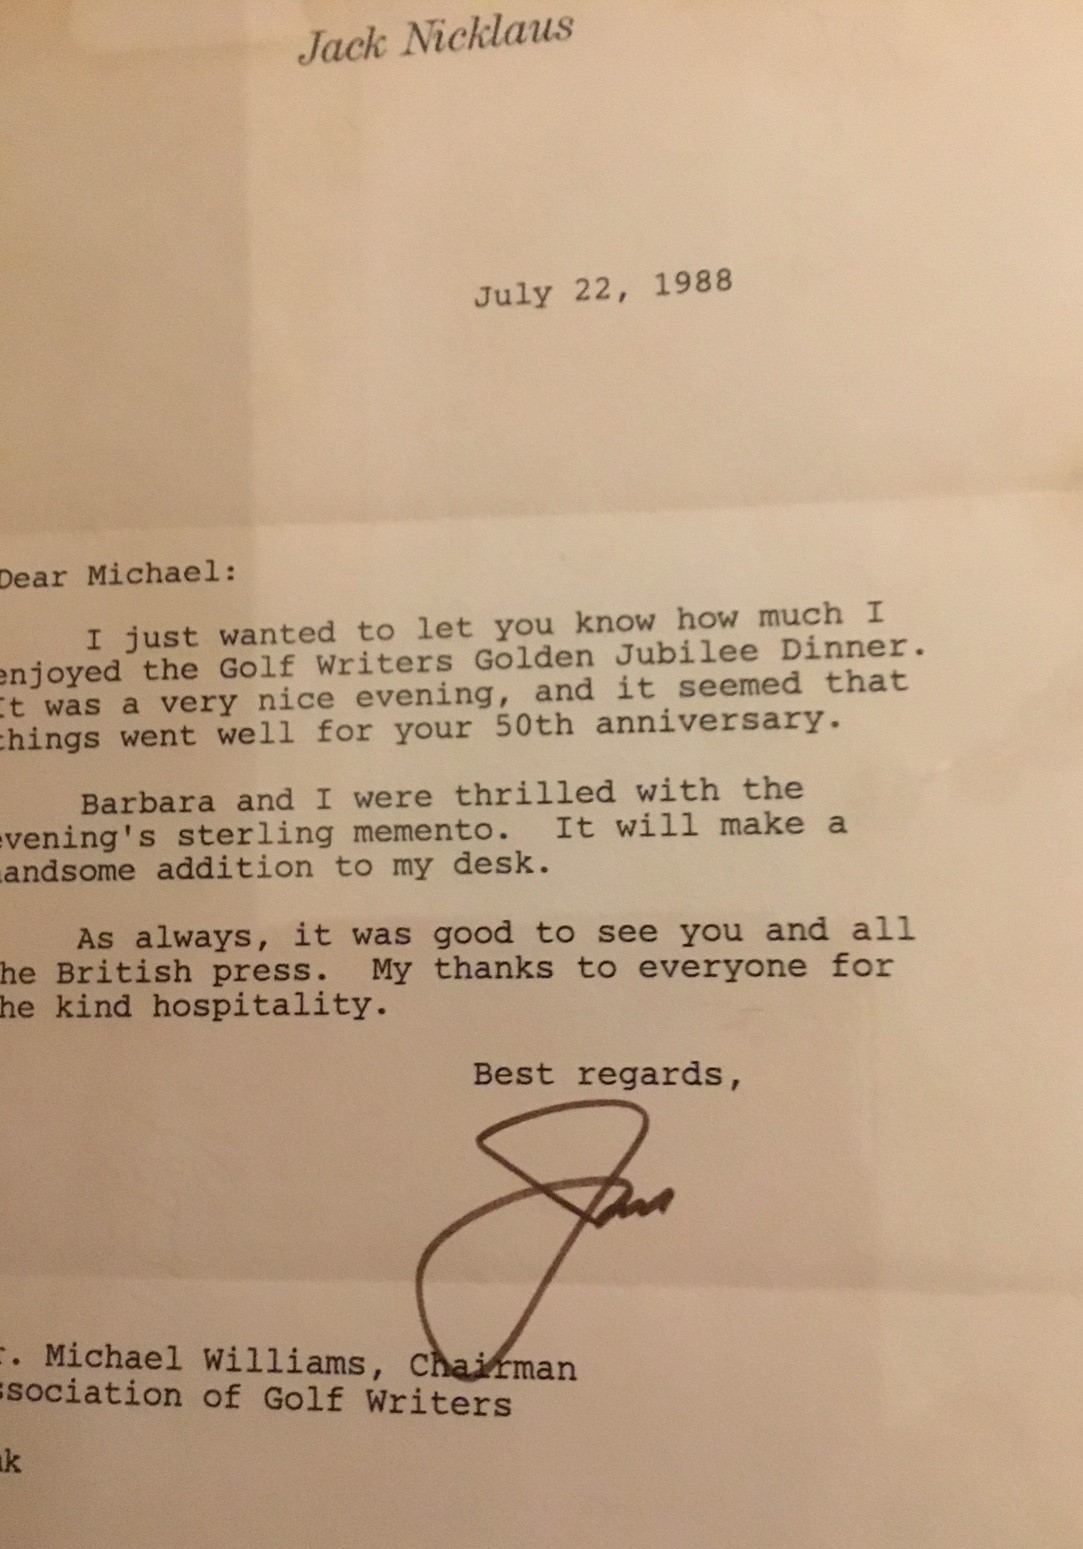 Letter from Jacki Nicklaus thanking the AGW Chairman Michael Williams for the gift of an nk well to celebrate the AGWs 50th anniversary in 1988. 